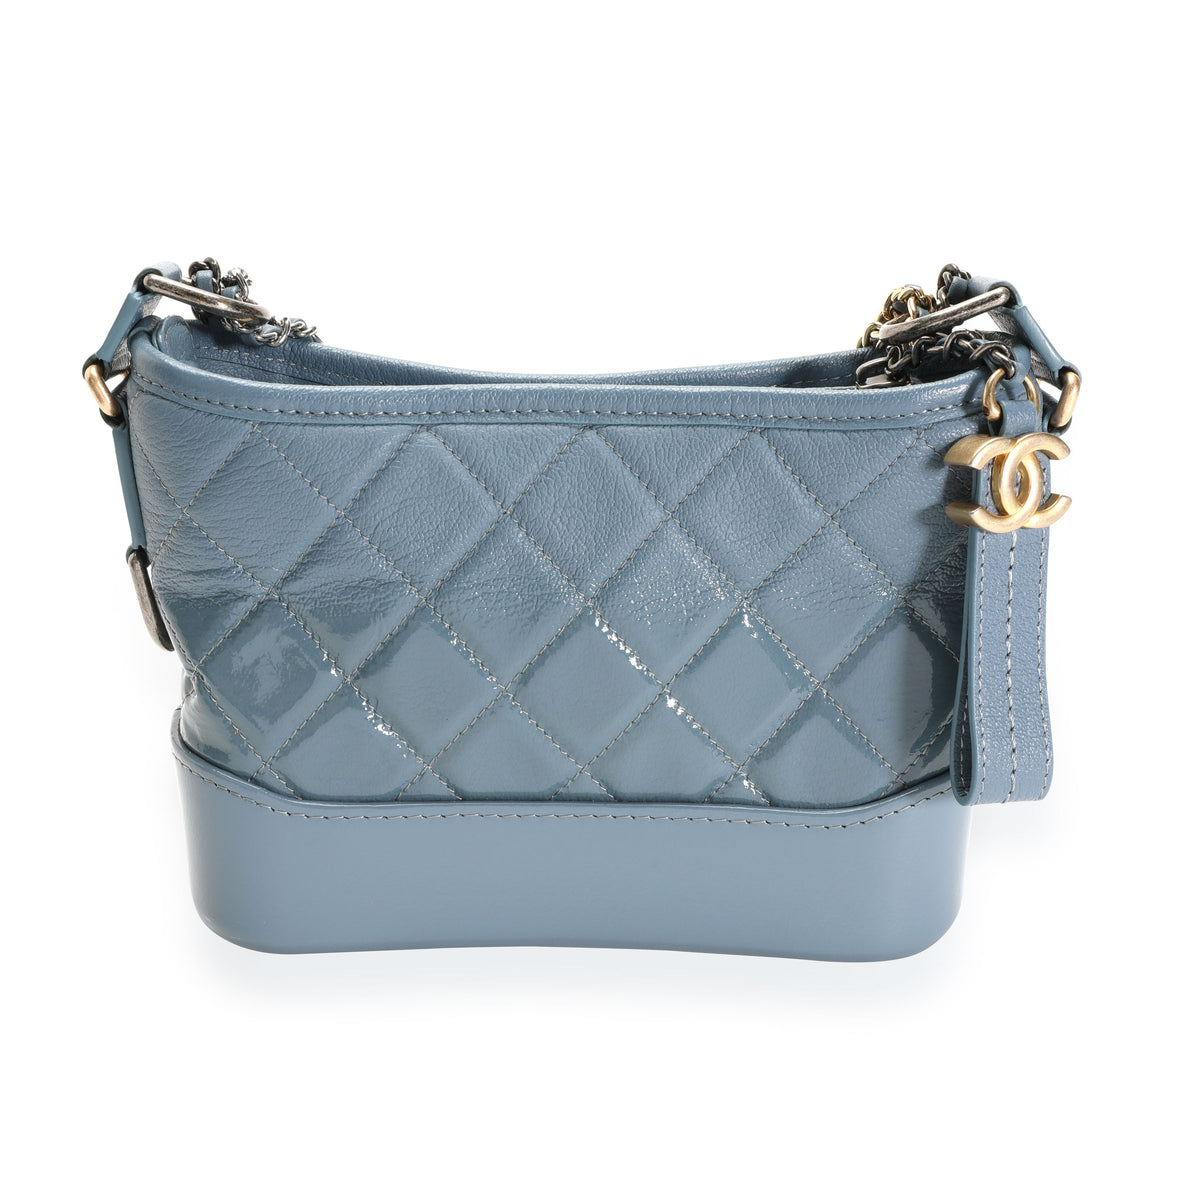 Chanel Blue Ombré Quilted Patent Leather  Aged Calfskin Small Gabrielle  Hobo  myGemma  QA  Item 112458